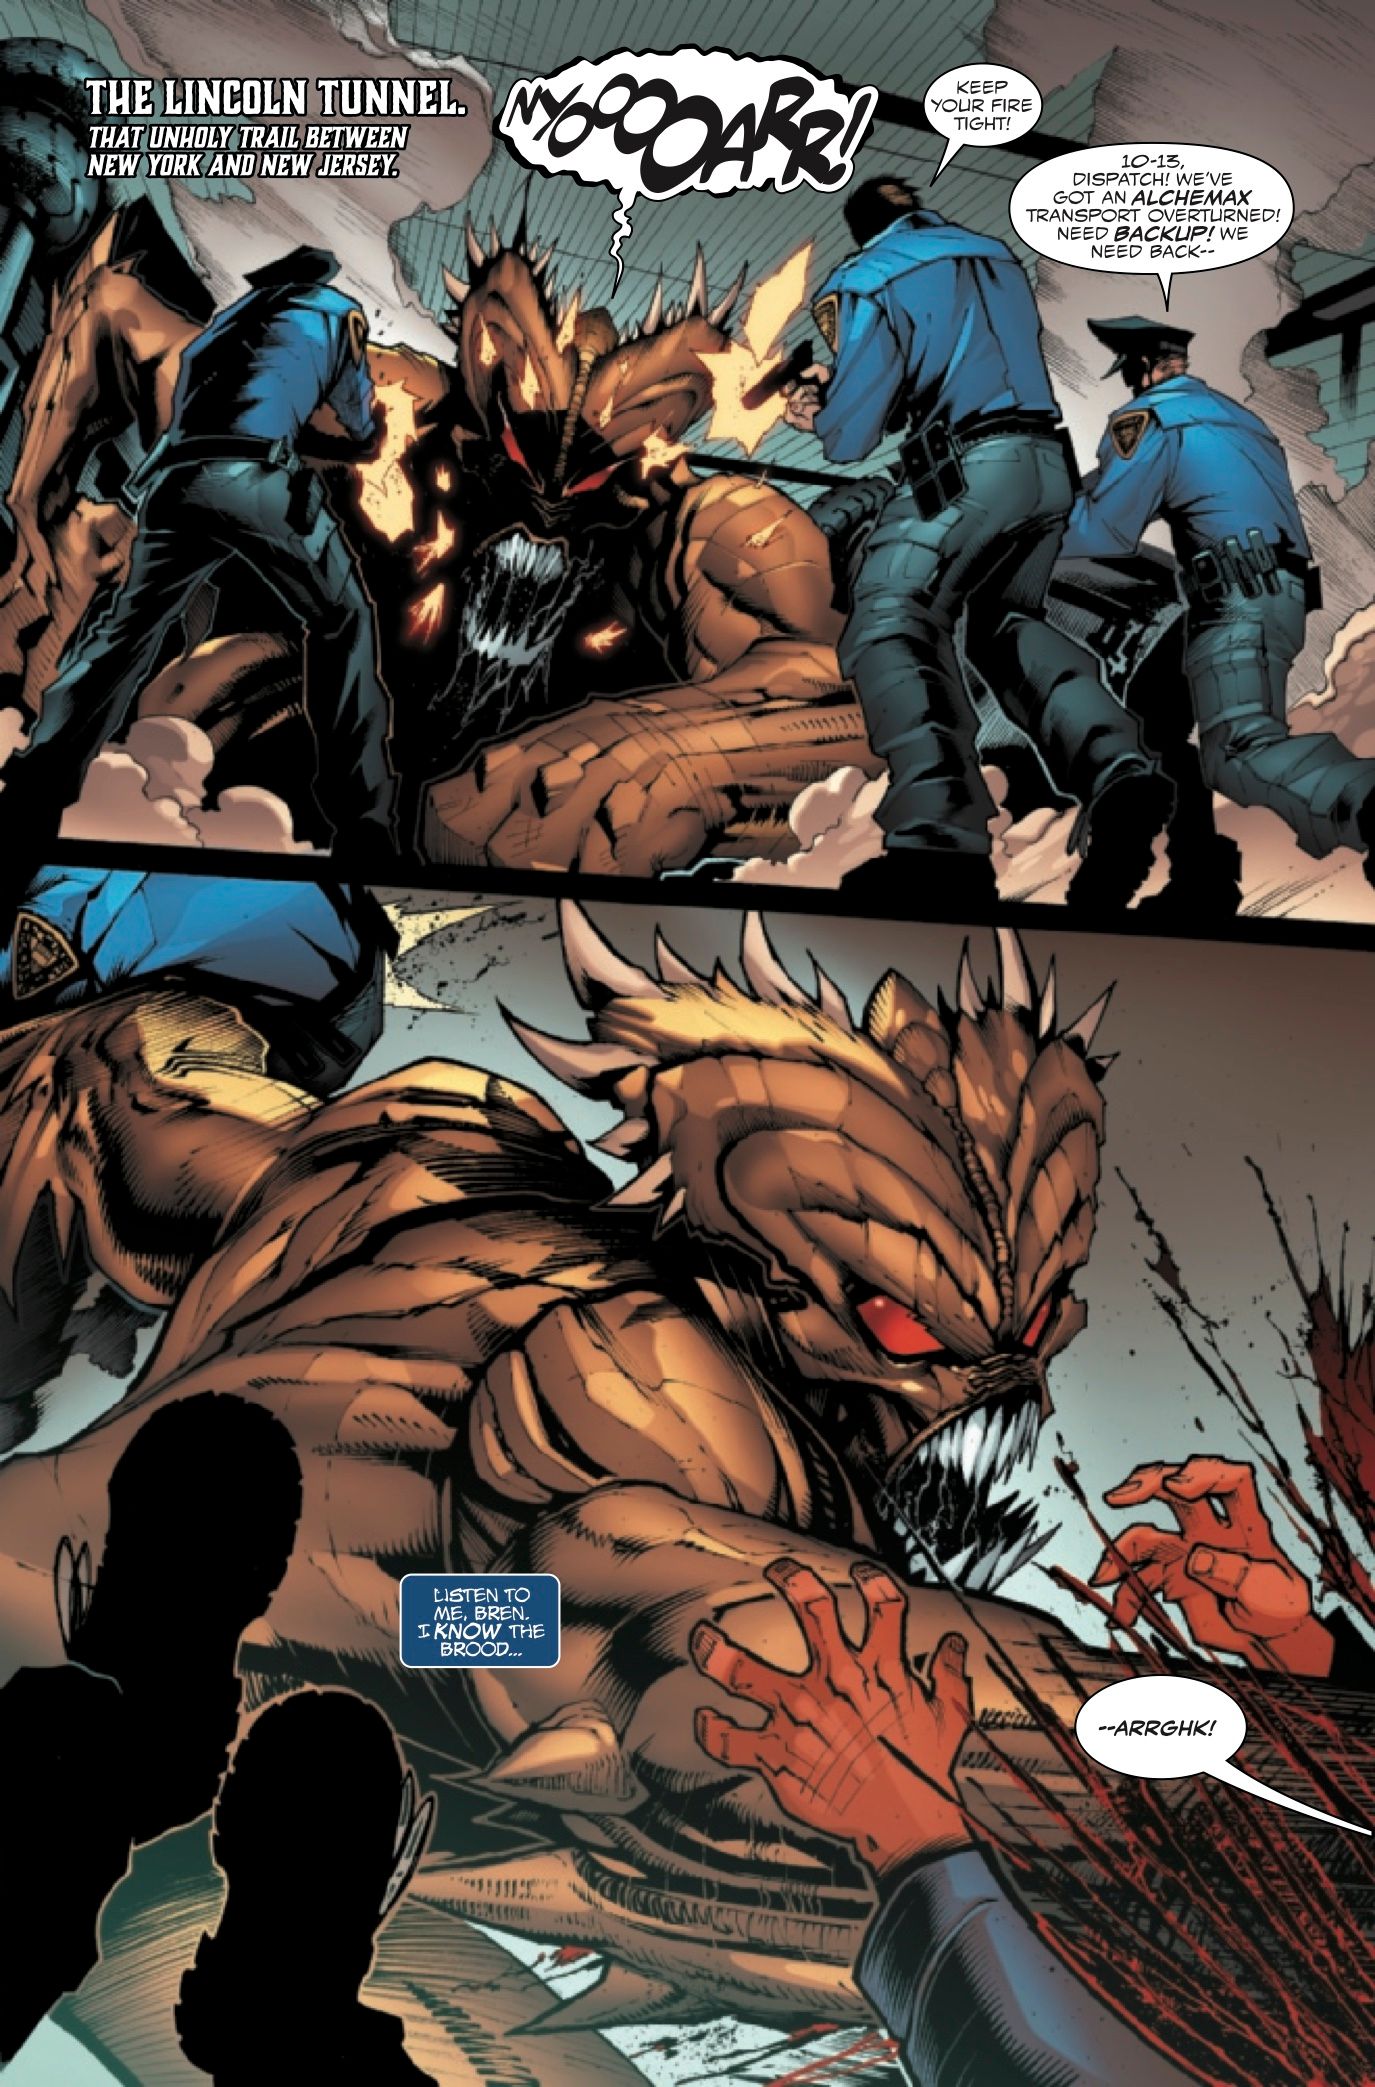 Planet-Symbiotes-Toxin-Preview-Page-1